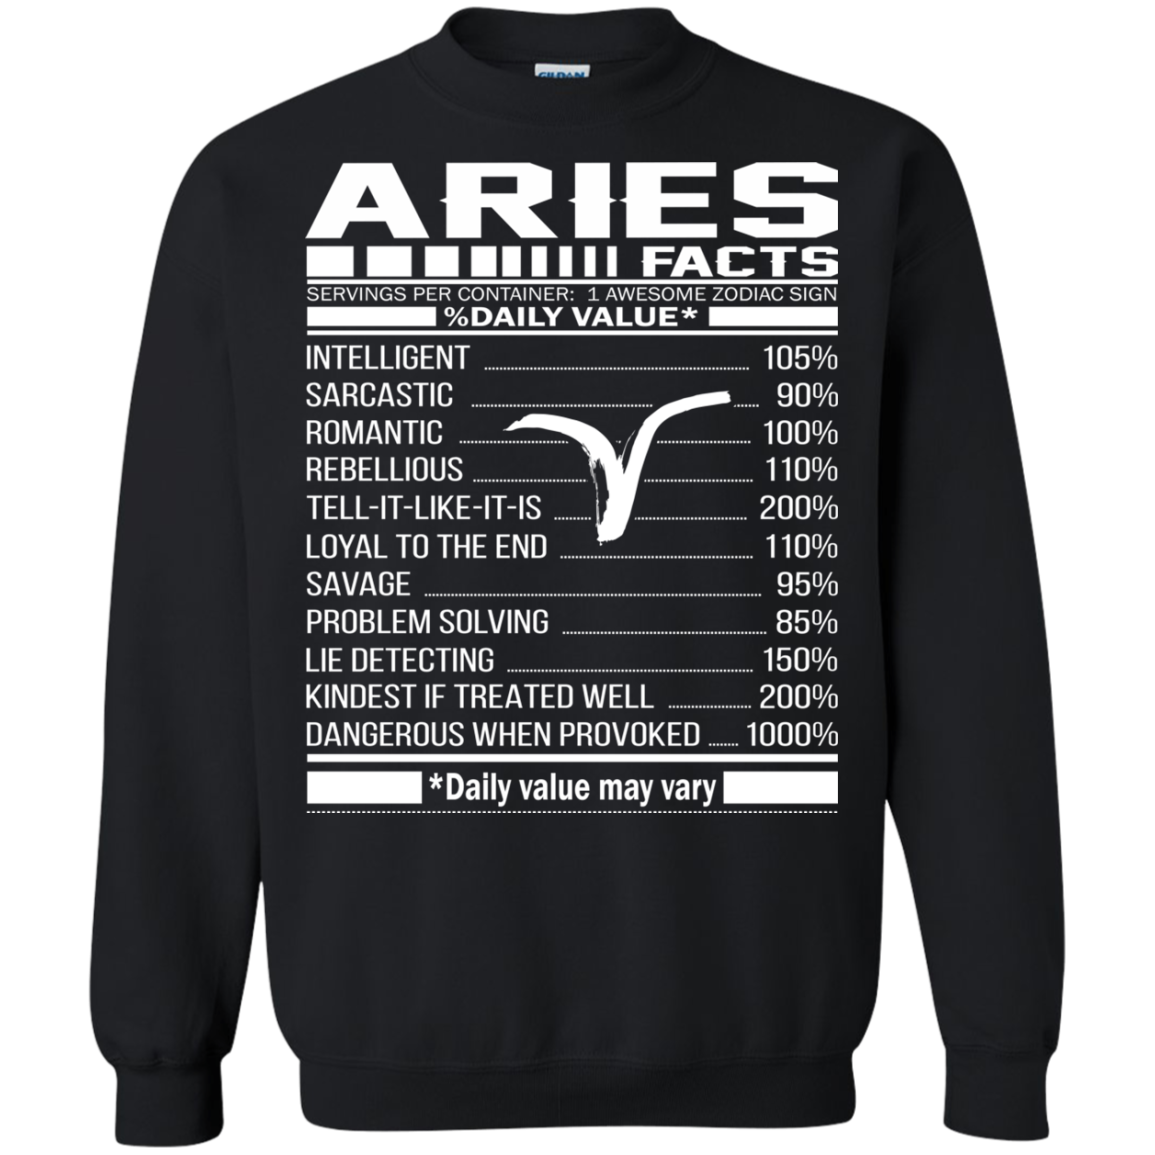 Aries Facts - Awesome Zodiac Sign - %Daily Value Shirt, Hoodie, Tank ...